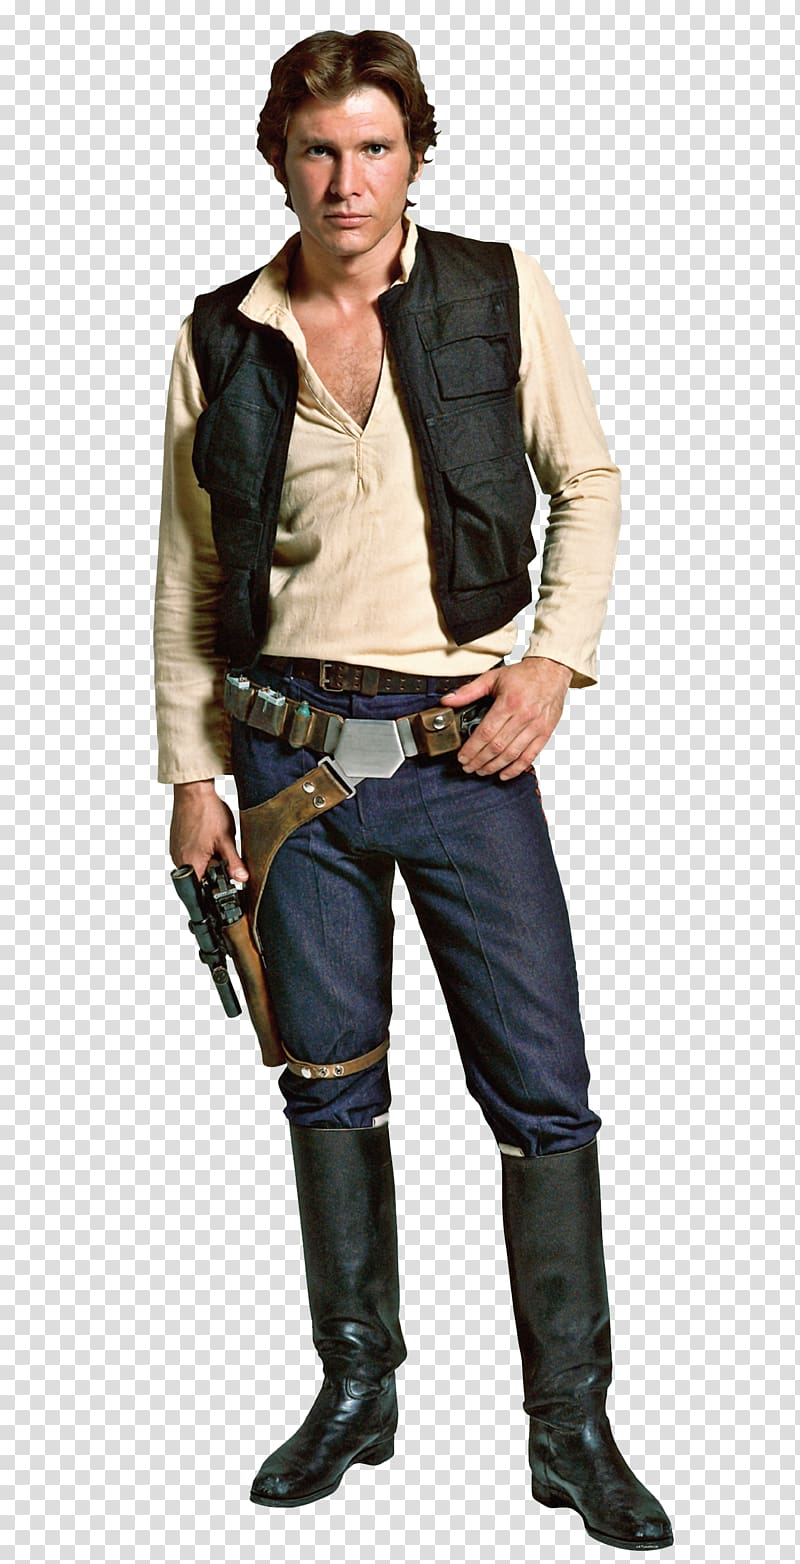 man in vest and boots holding pistol, Han Solo Solo: A Star Wars Story Leia Organa Luke Skywalker Obi-Wan Kenobi, cock transparent background PNG clipart